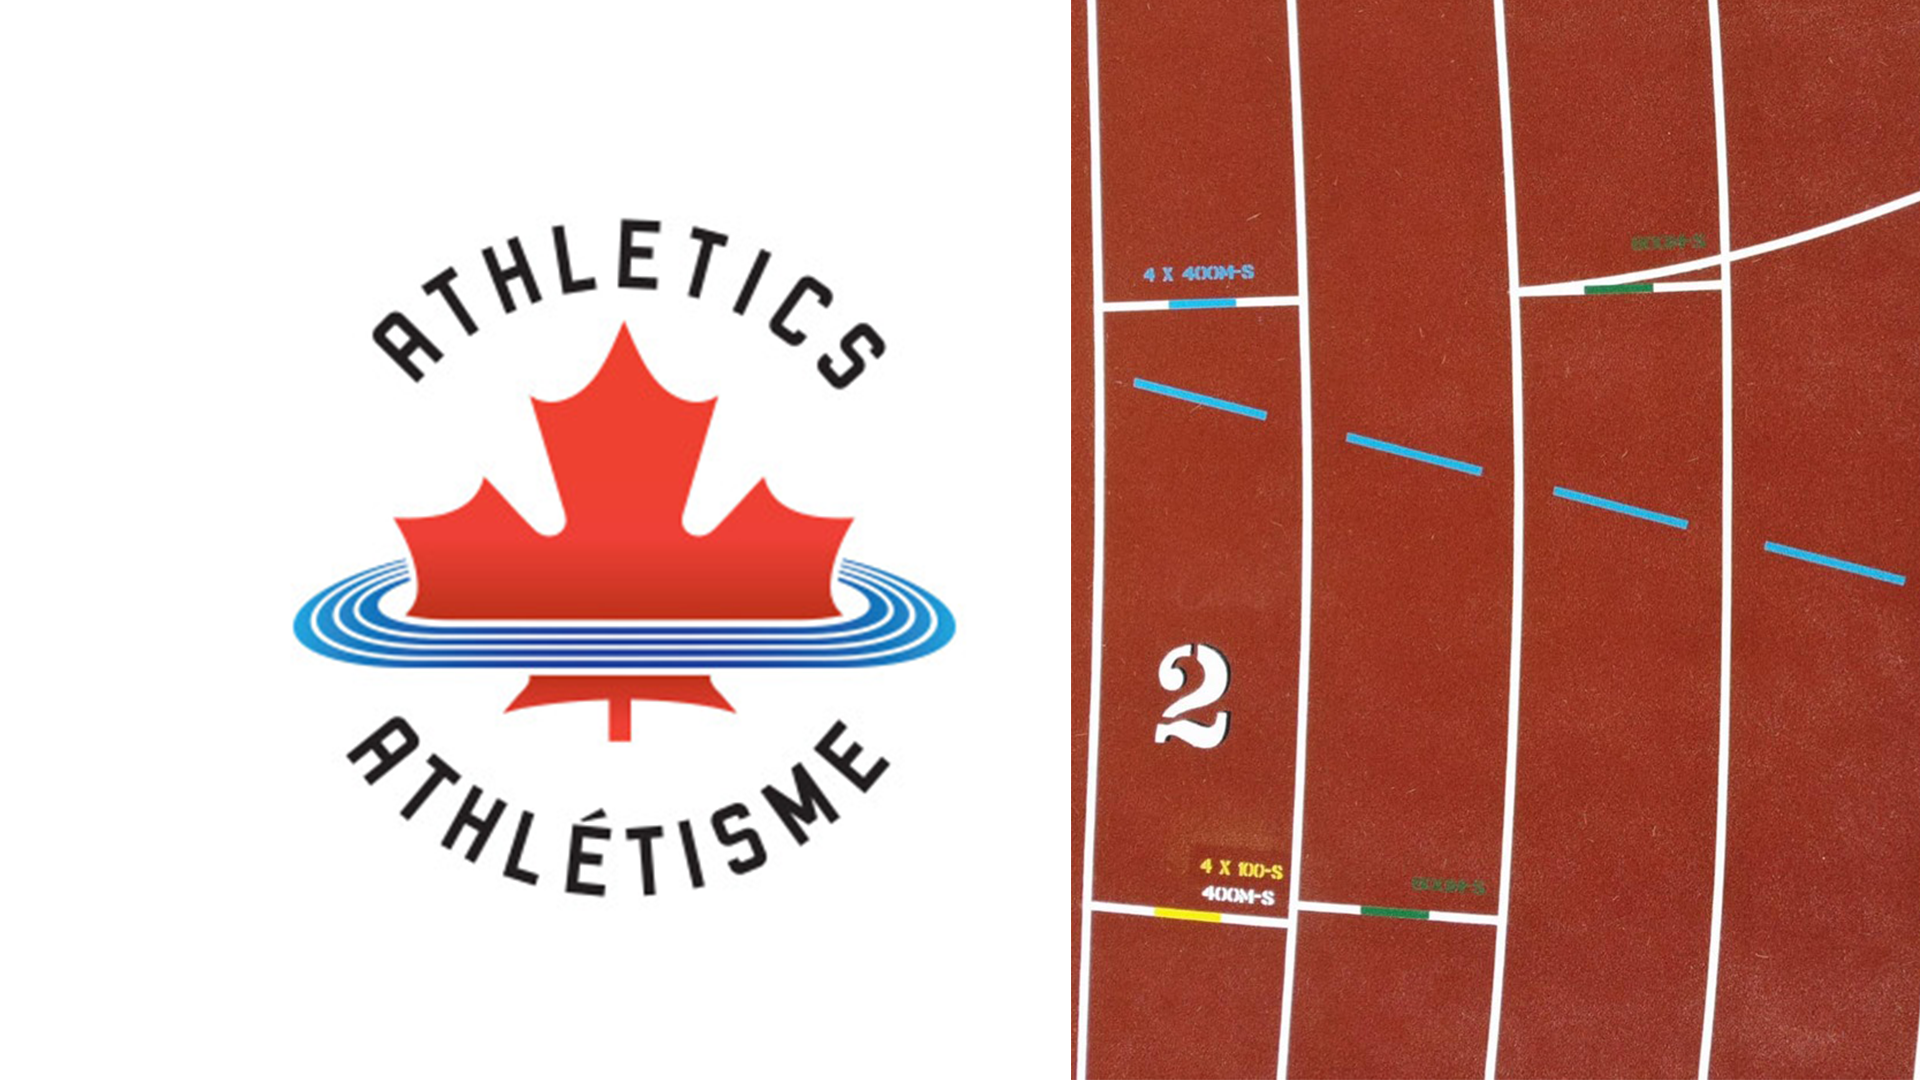 Athletics Canada and track surfacing leaders Beynon and Playteck